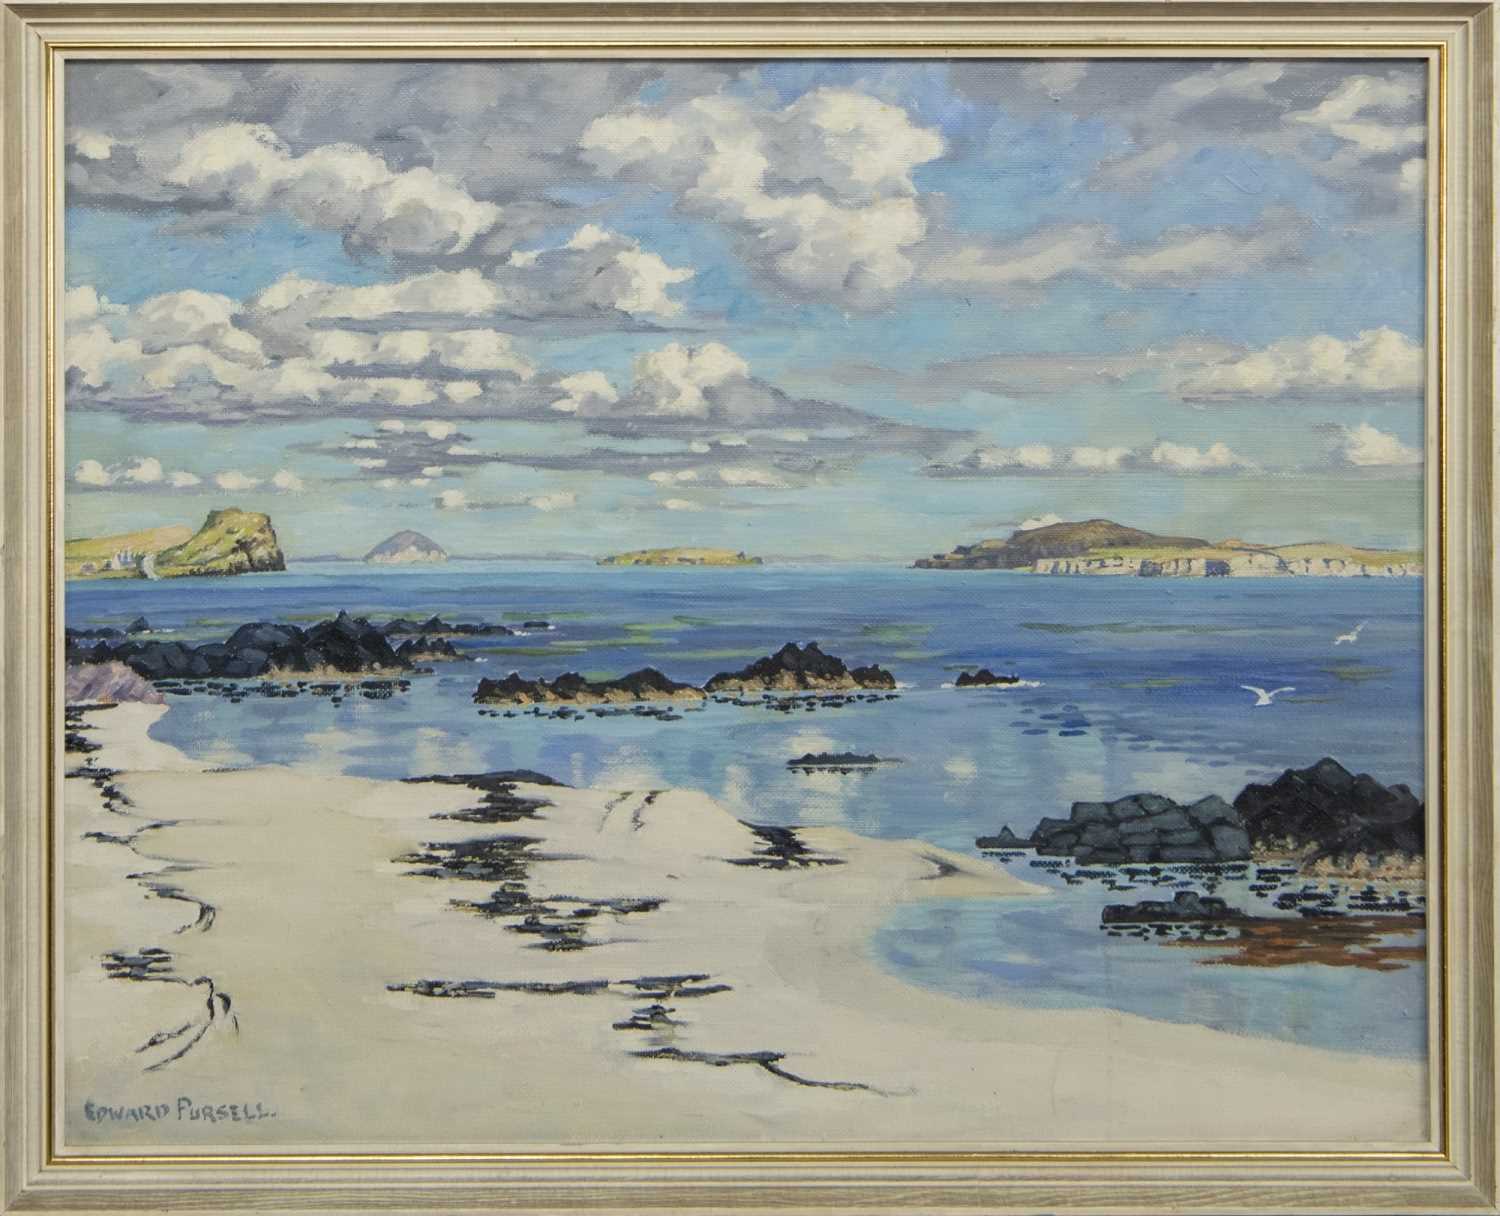 Lot 436 - SCOTTISH SHORE, AN OIL BY EDWARD PURSELL